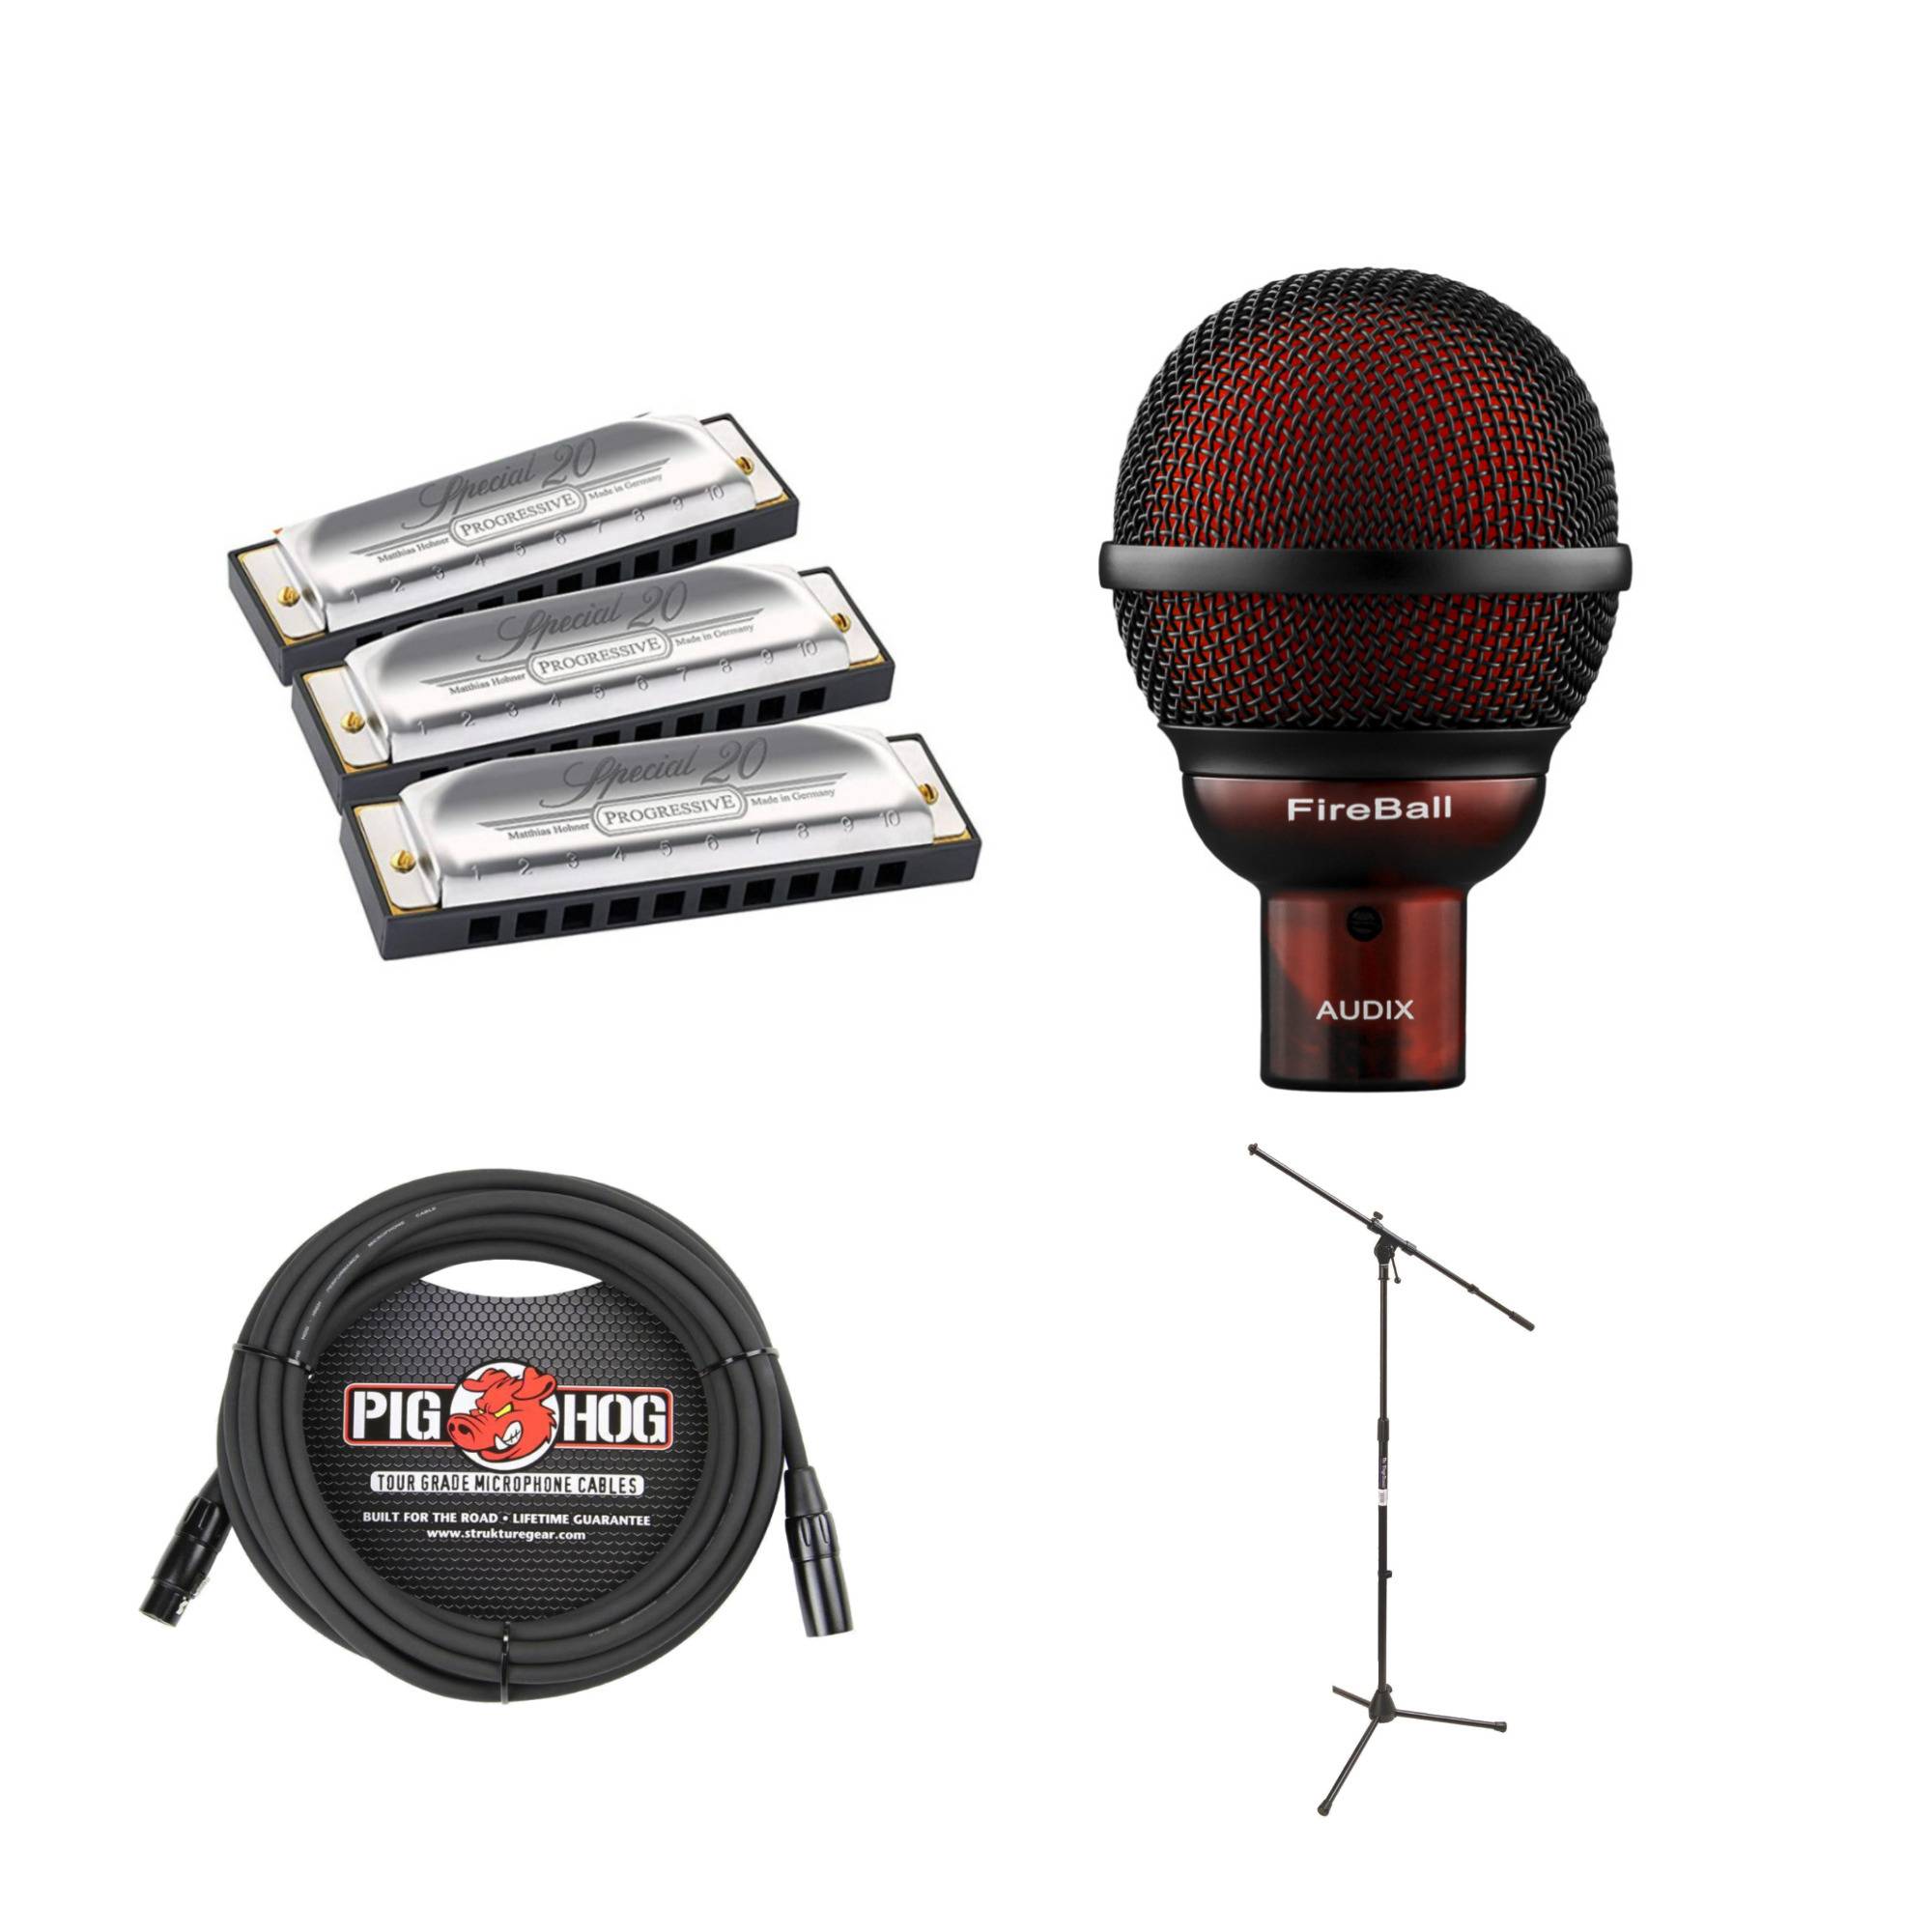 Hohner Special 20 Pro Pack 3-Piece Harmonicas with Harmonica Microphone, Boom Stand, and XLR Cable